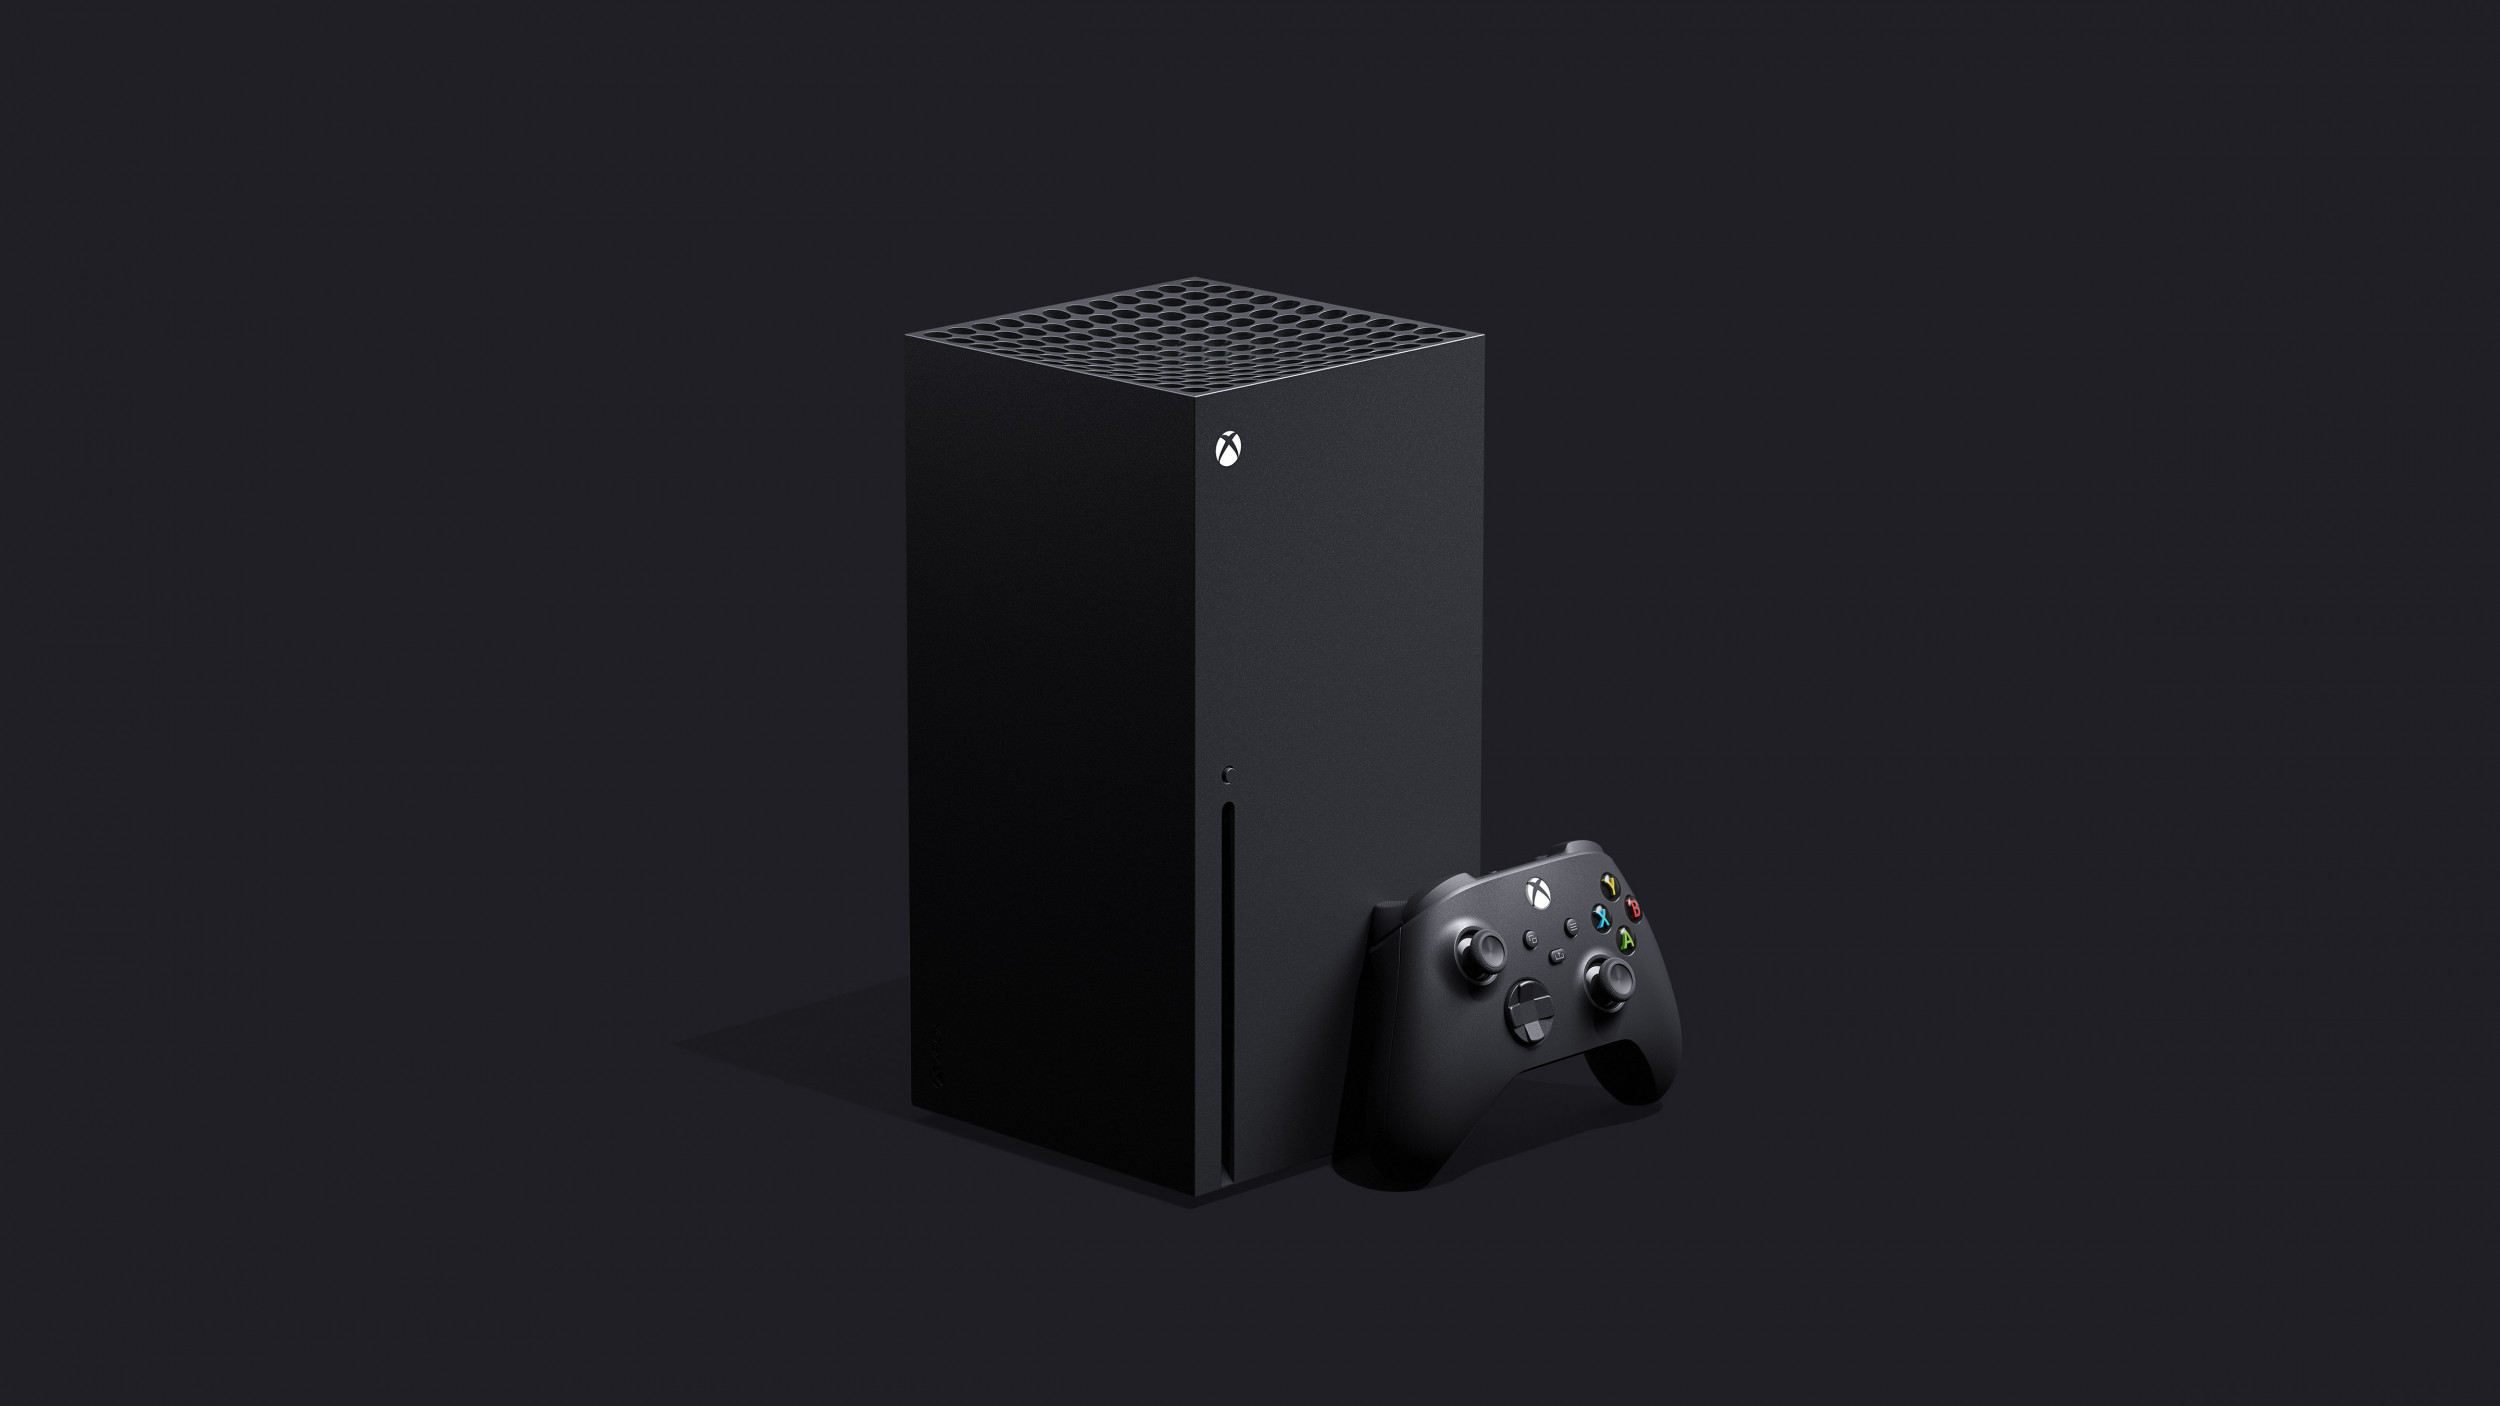 official xbox series x specs